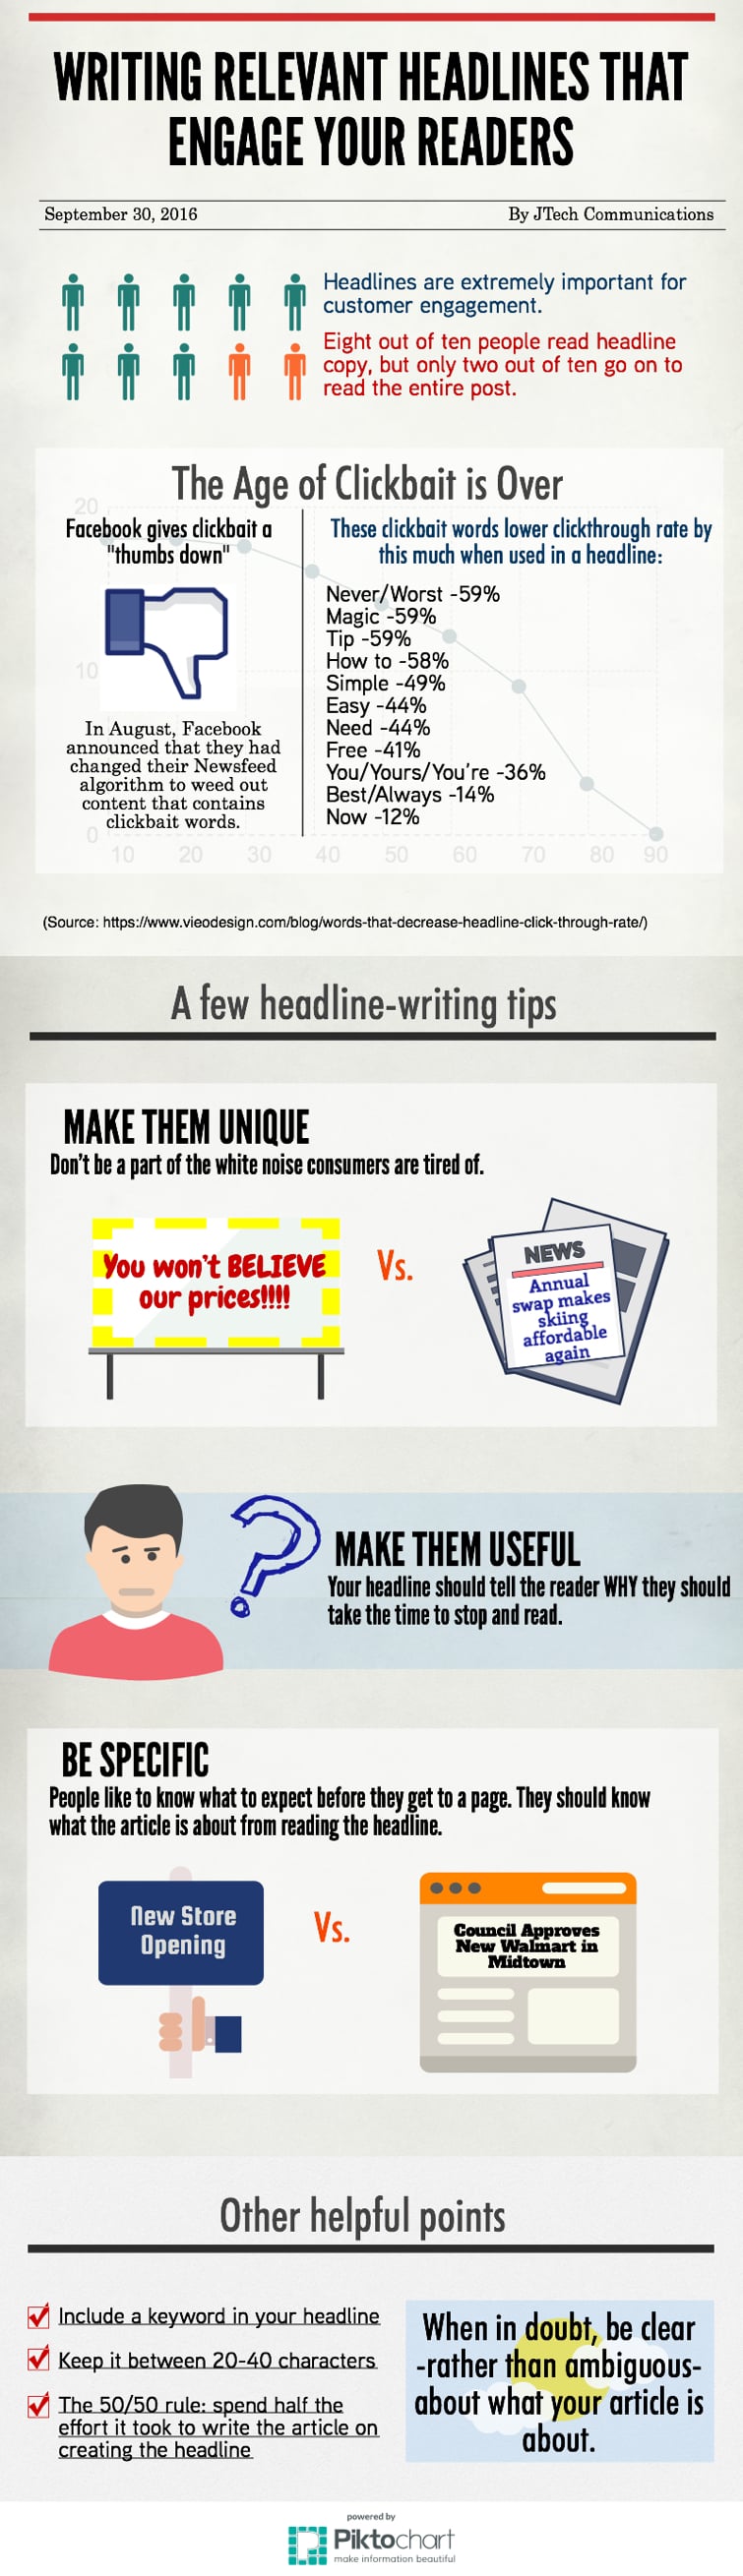 Tips for writing good headlines infographic.